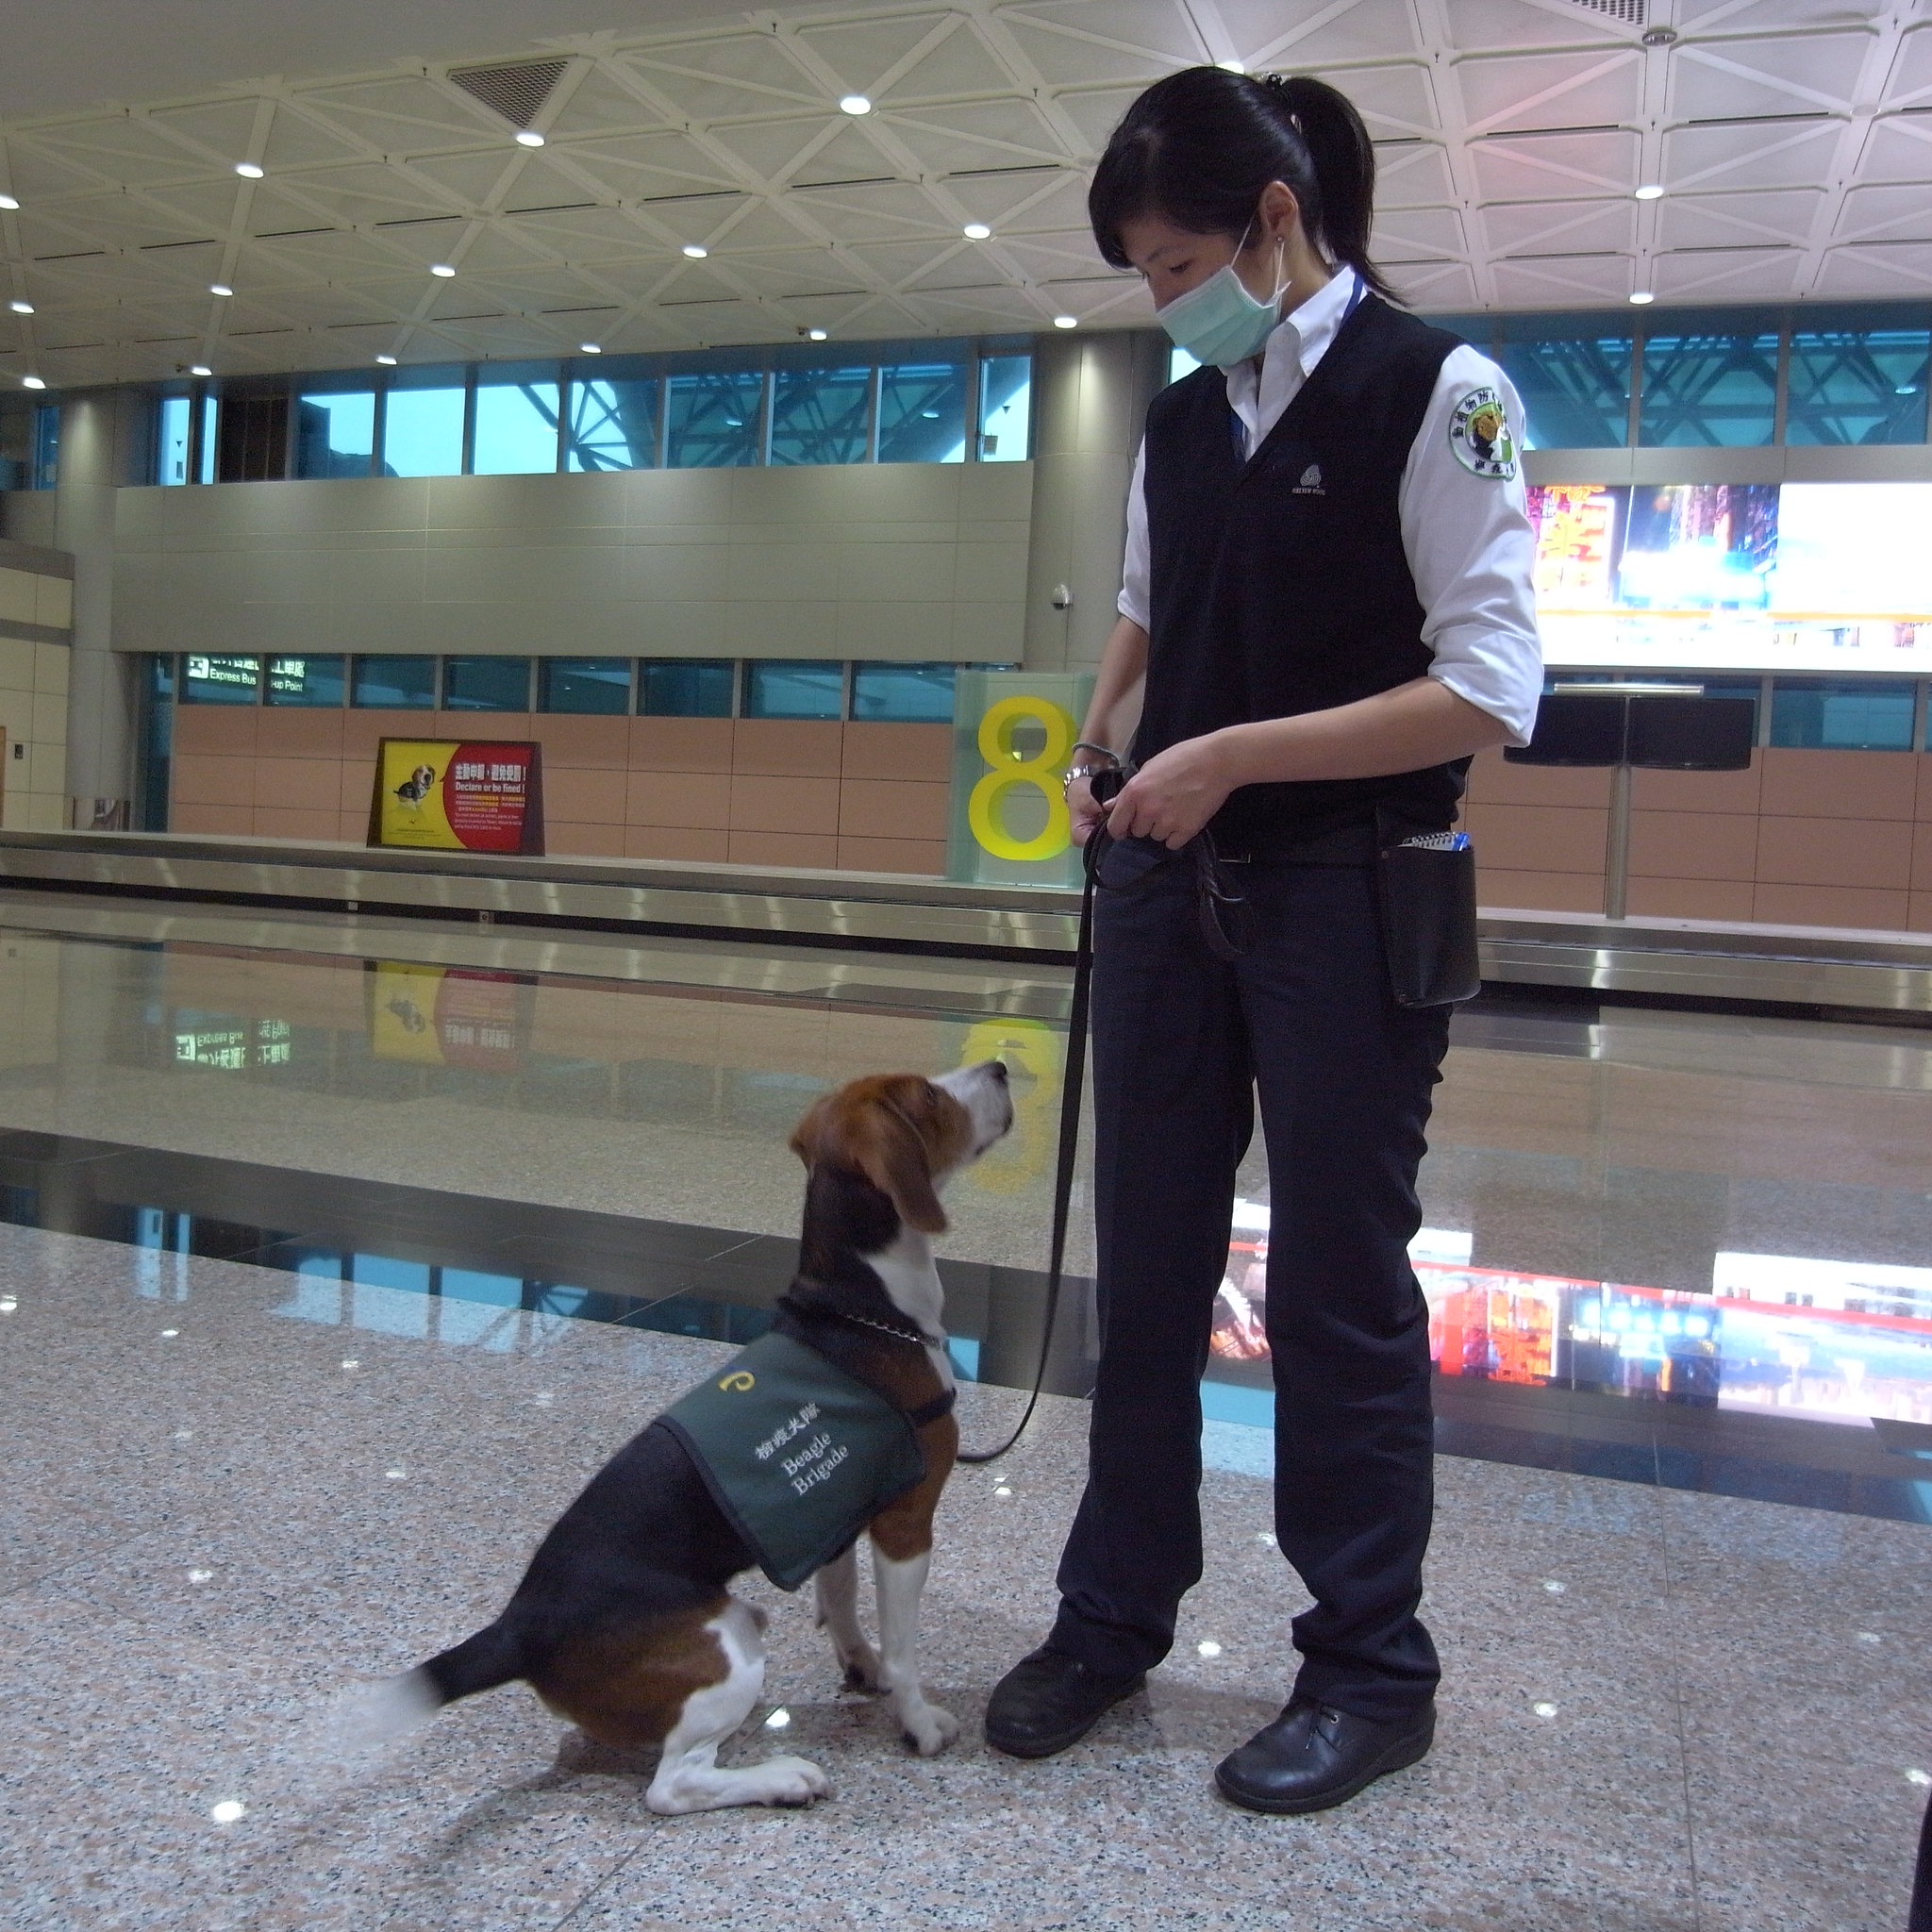 Sniffer dogs are being trained to detect covid-19 on passengers as part of airport screening